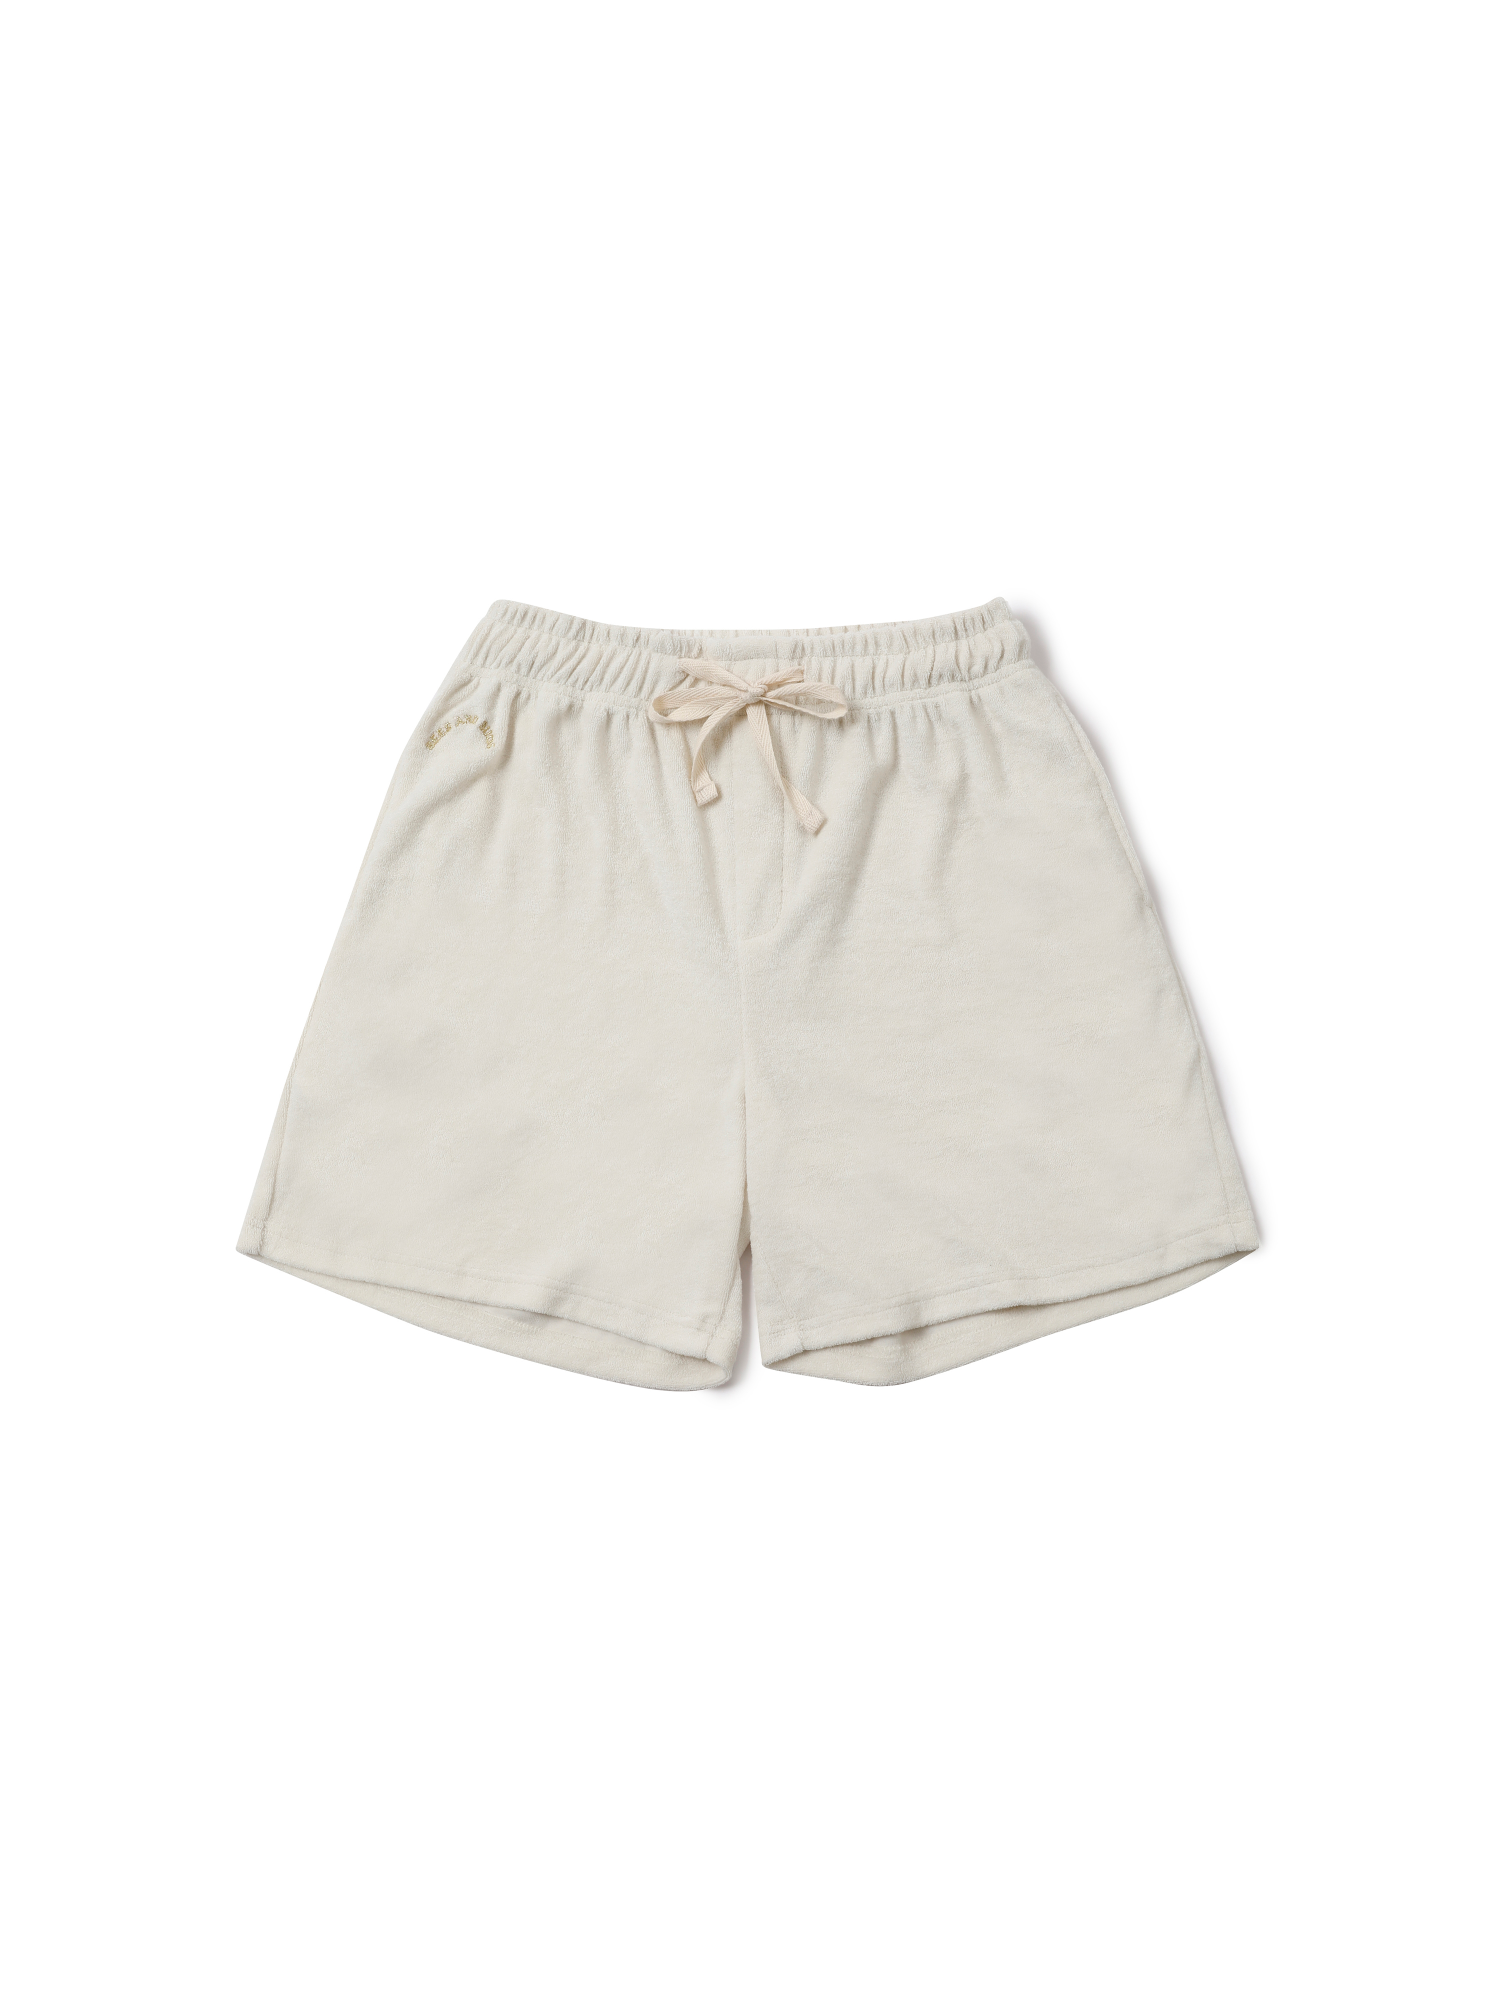 Active#1 Terry Pants - Ivory